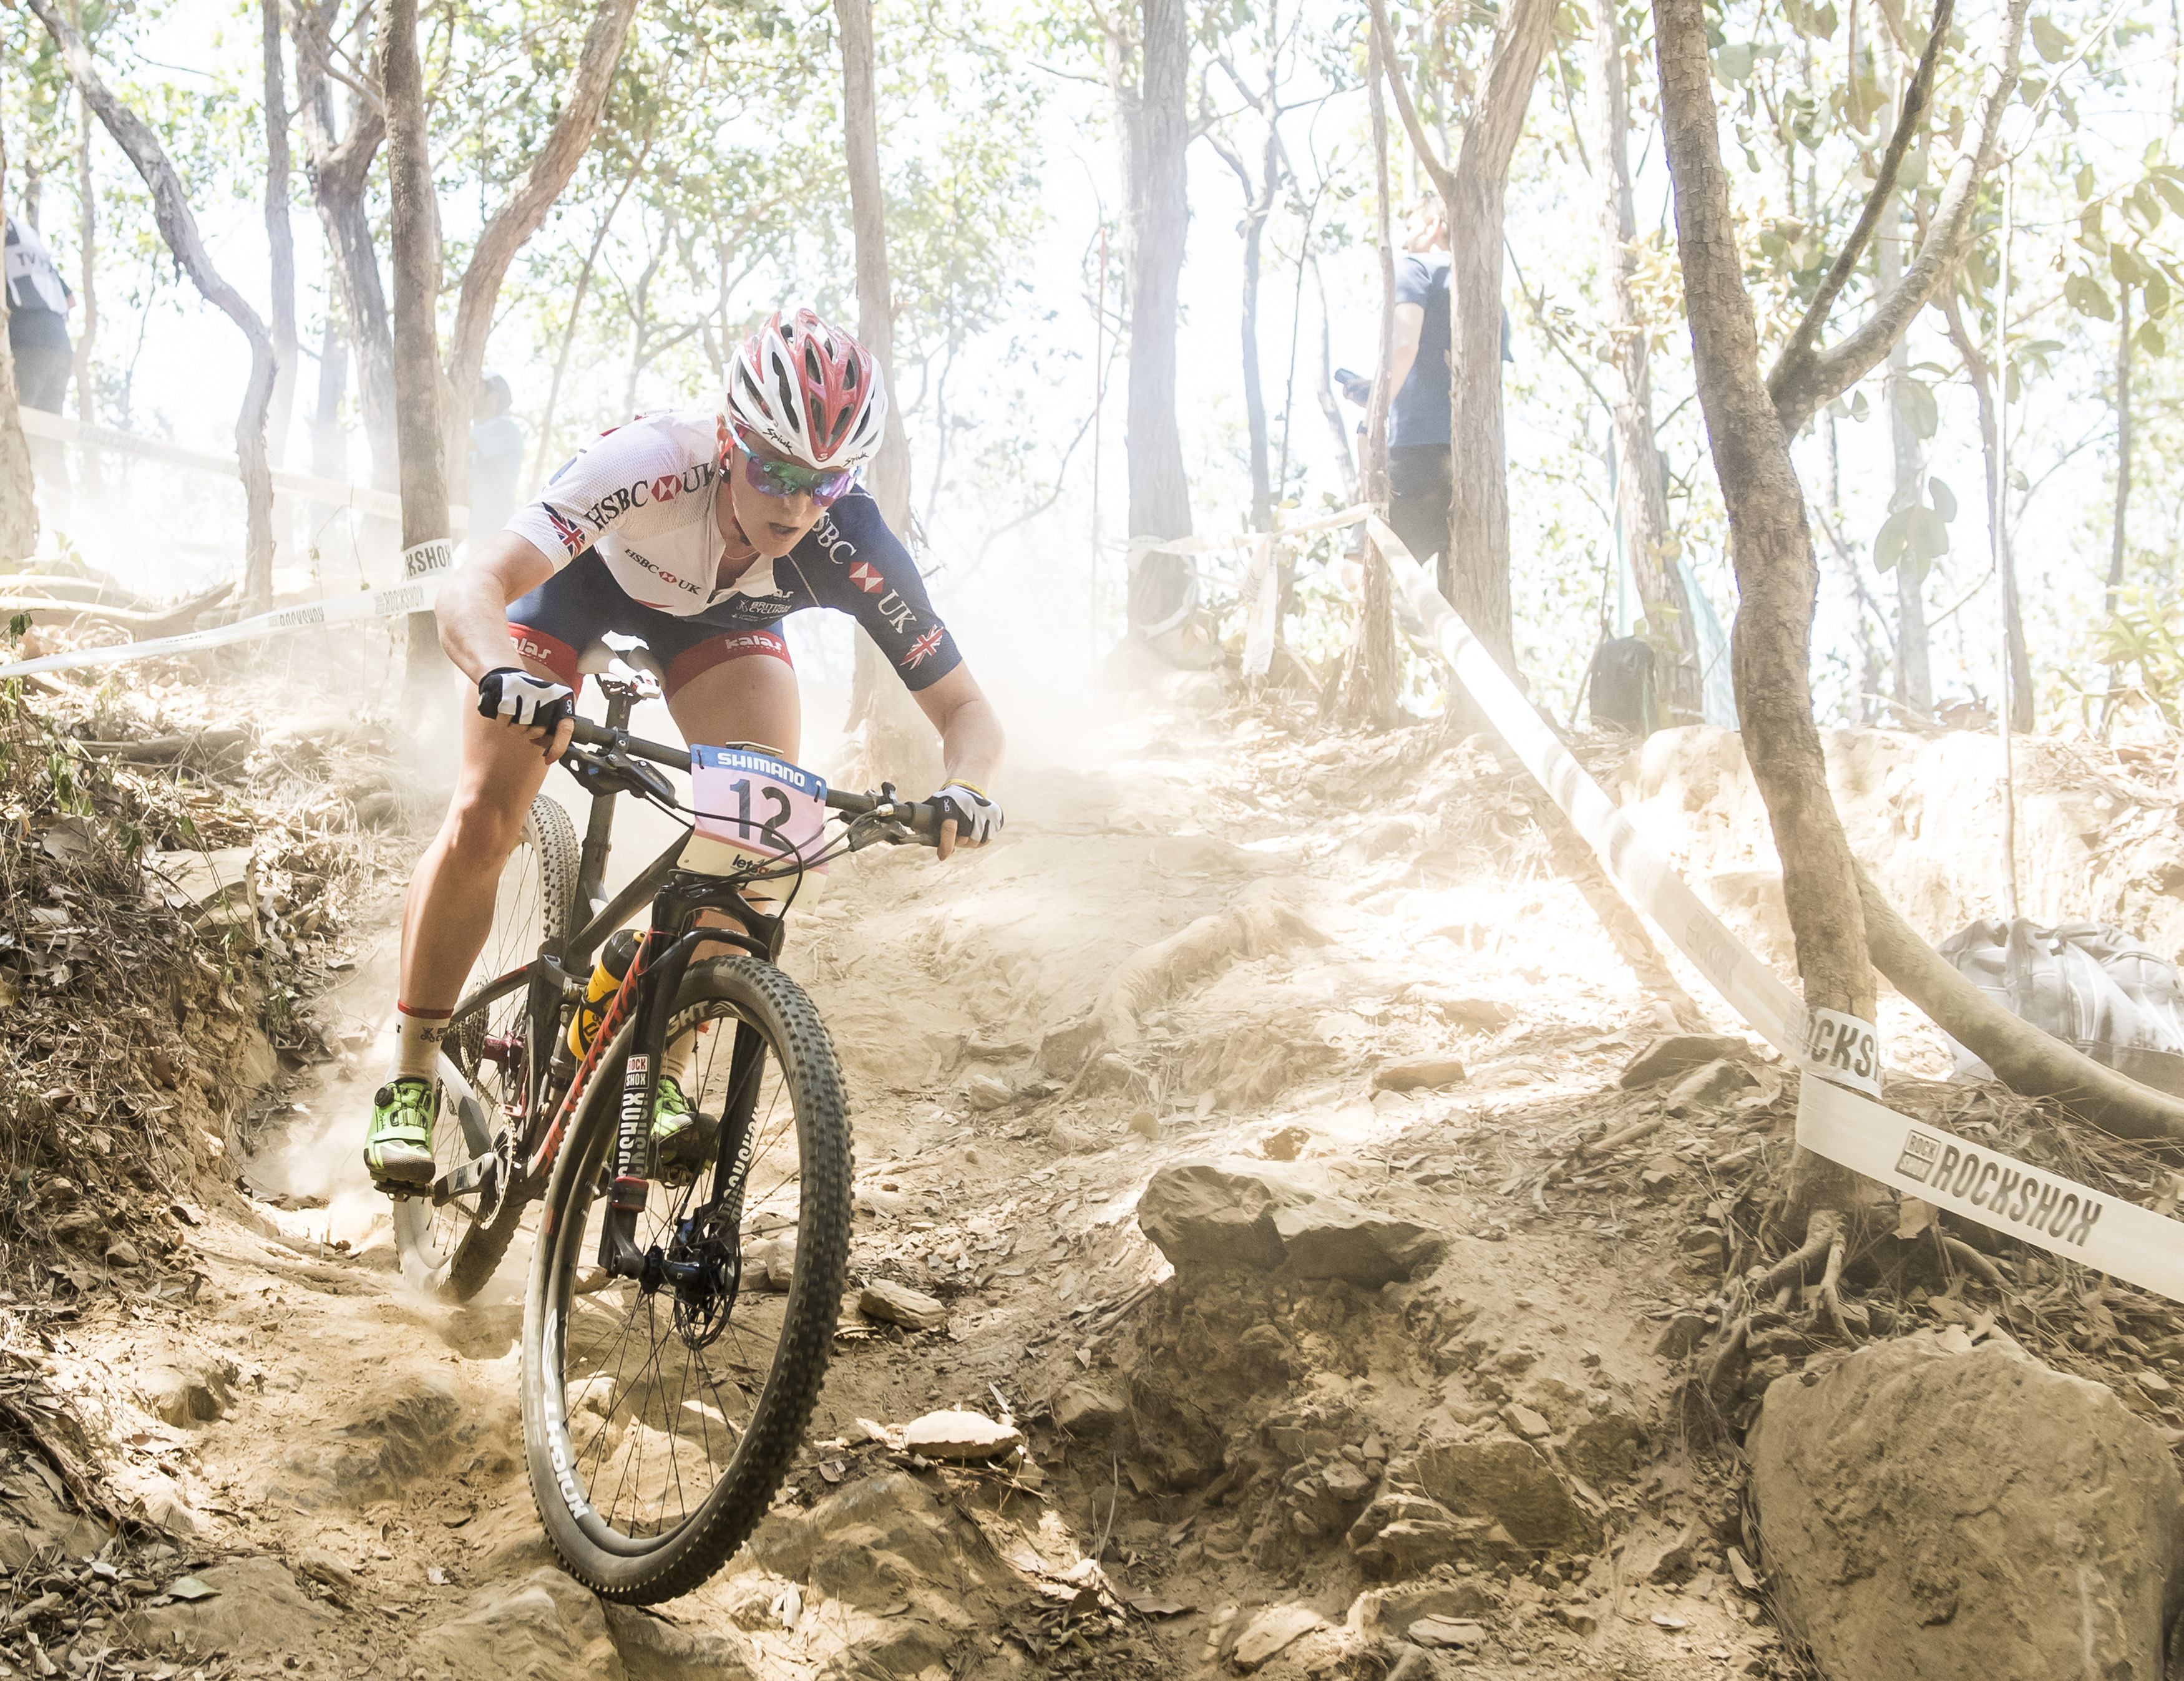 Annie Last won Great Britain’s first ever medal in elite women’s cross-country at the UCI Mountain Bike World Championships